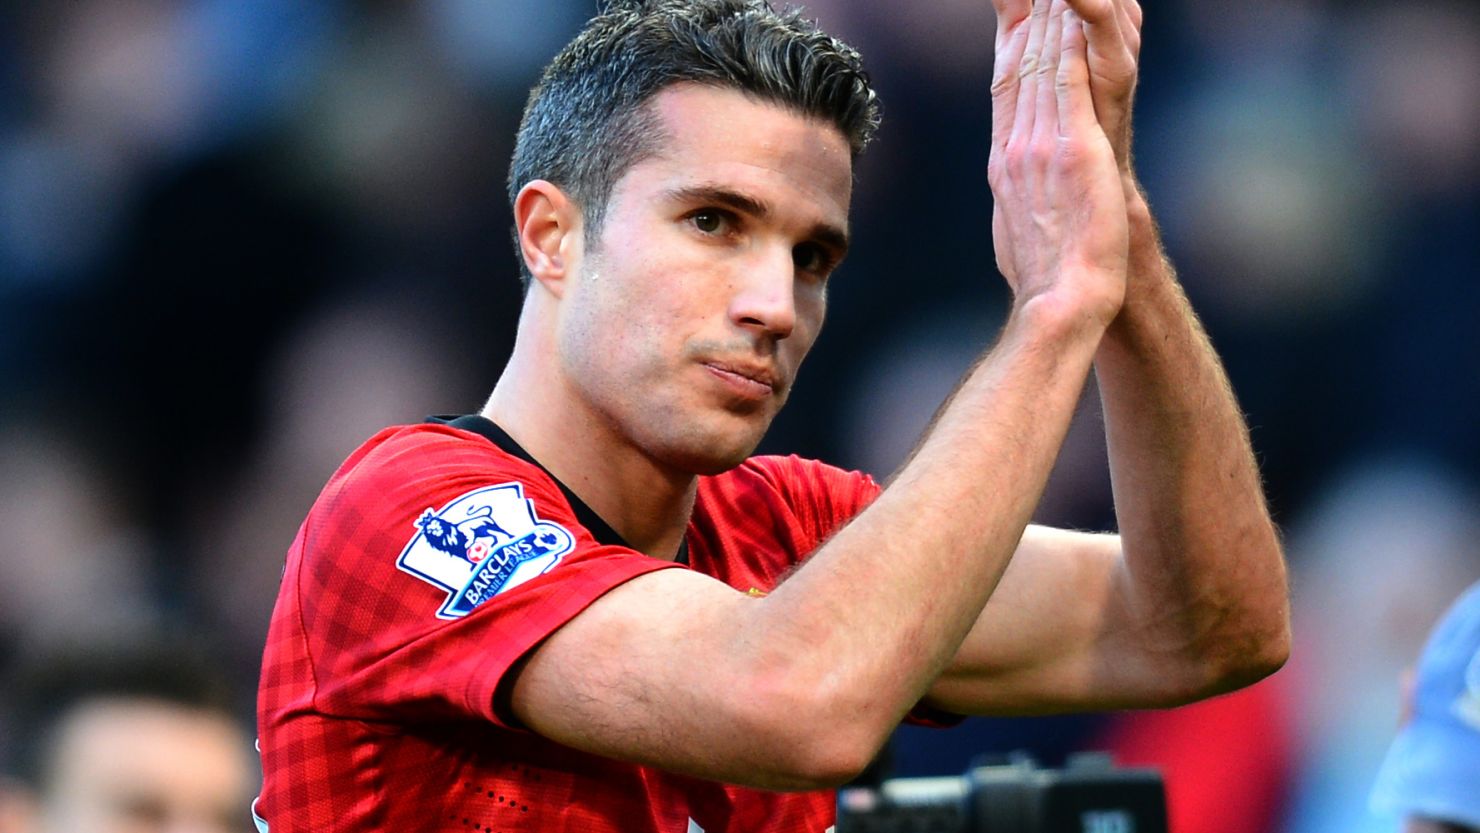 Robin van Persie starred against his former club Arsenal in Manchester United's 2-1 win at Old Trafford.